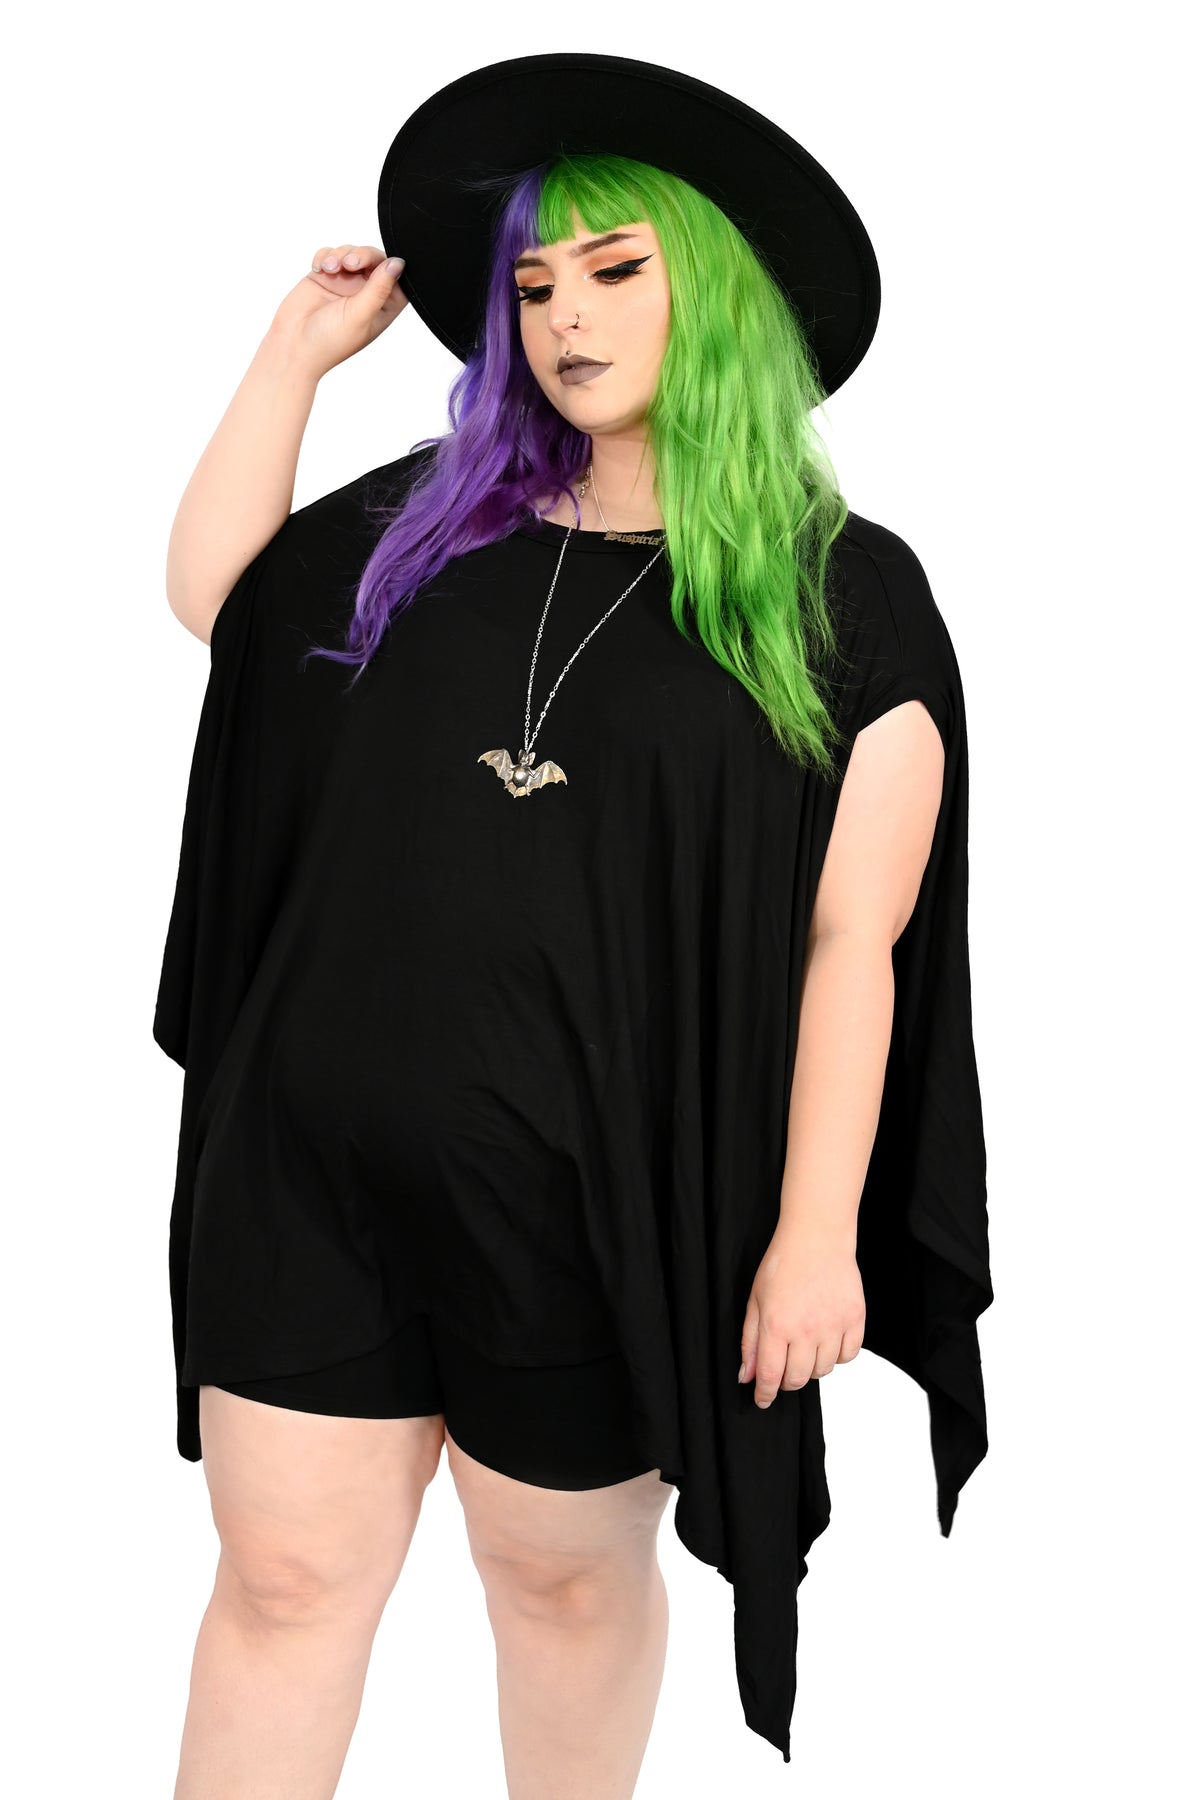 Super soft and stretchy cotton modal black tunic with draping fabric where sleeves would be